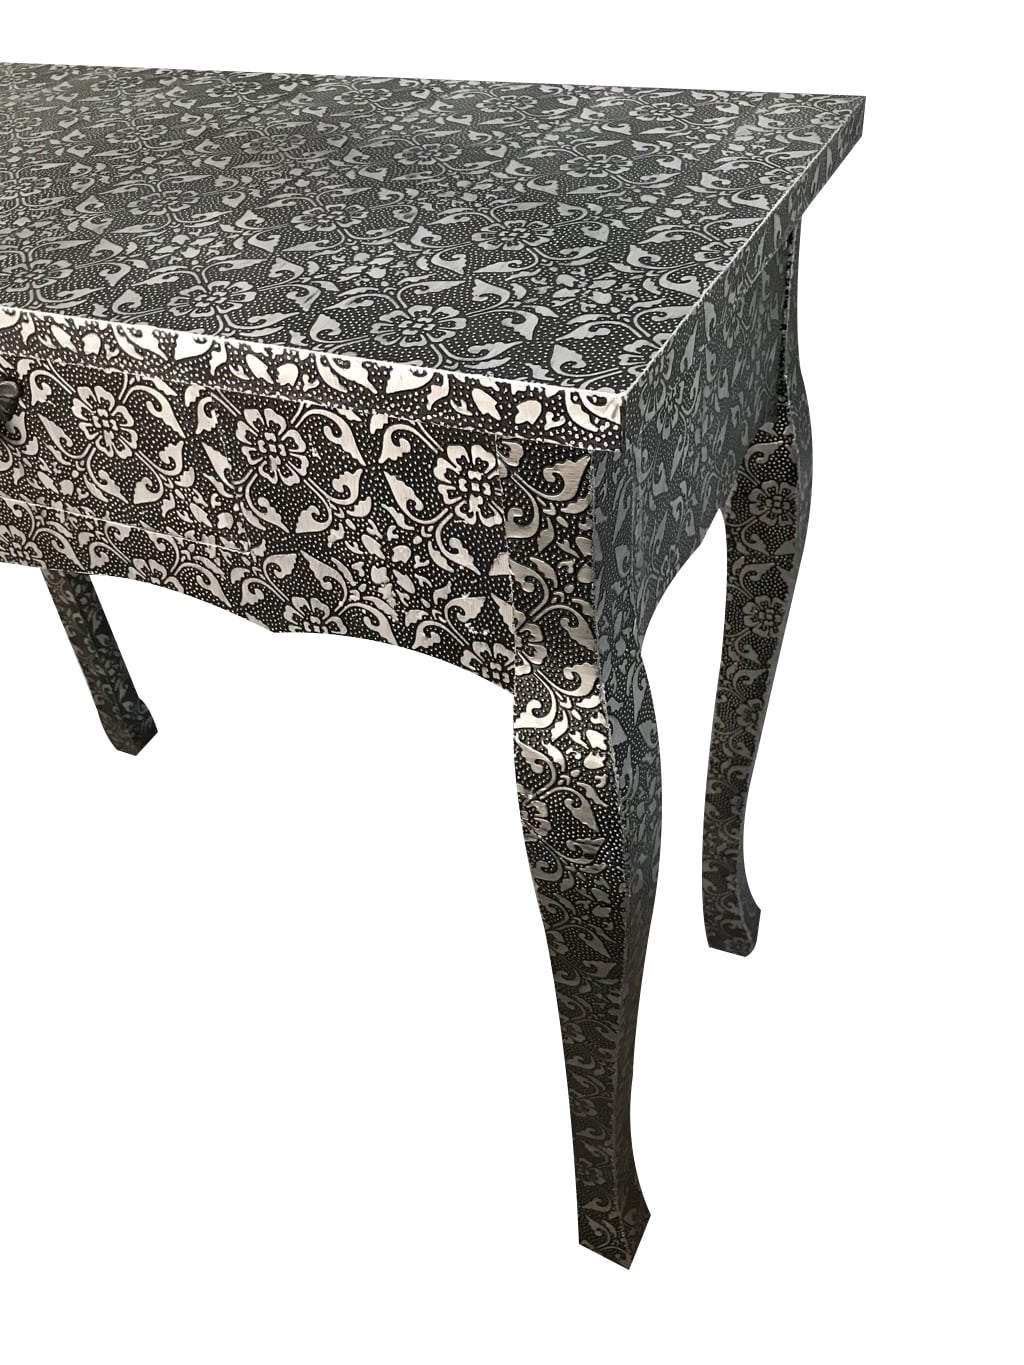 Repousse silver console table with black finish